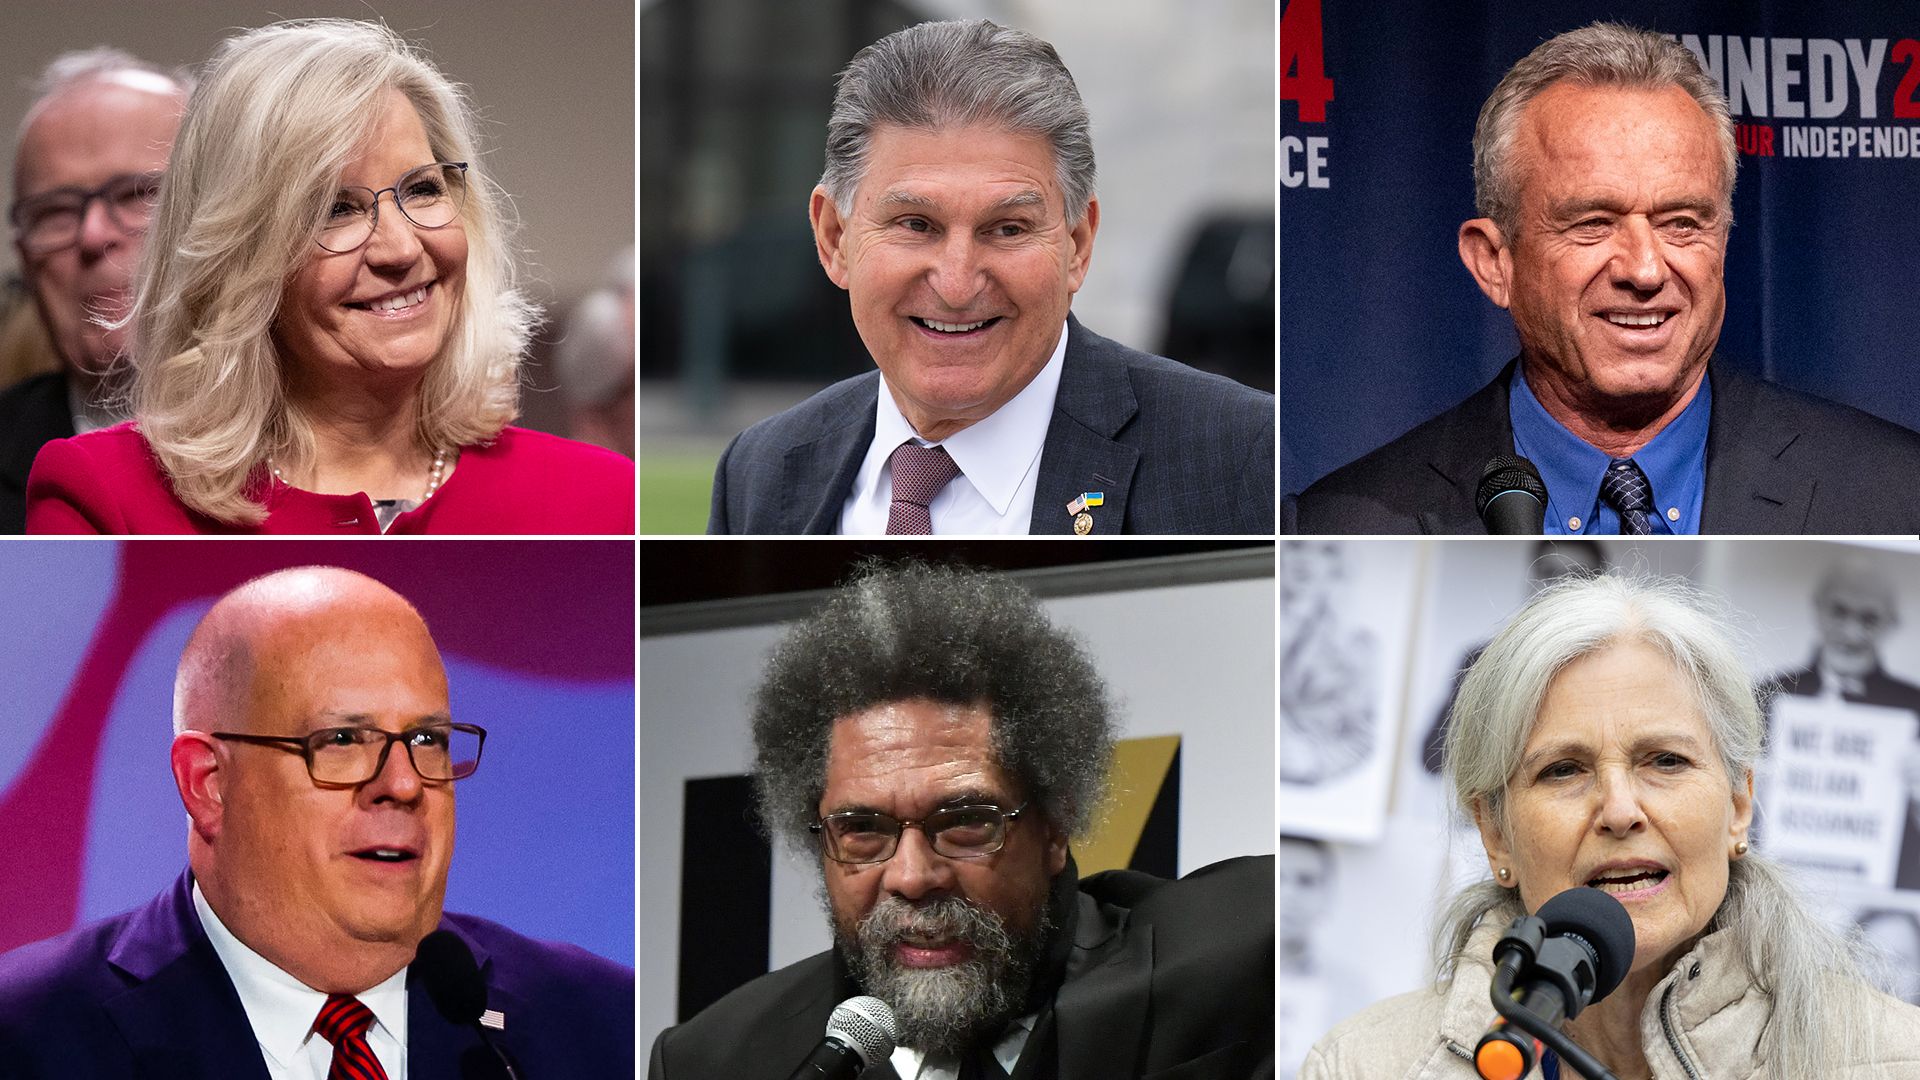 Meet 6 candidates weighing or pursuing third-party presidential bids